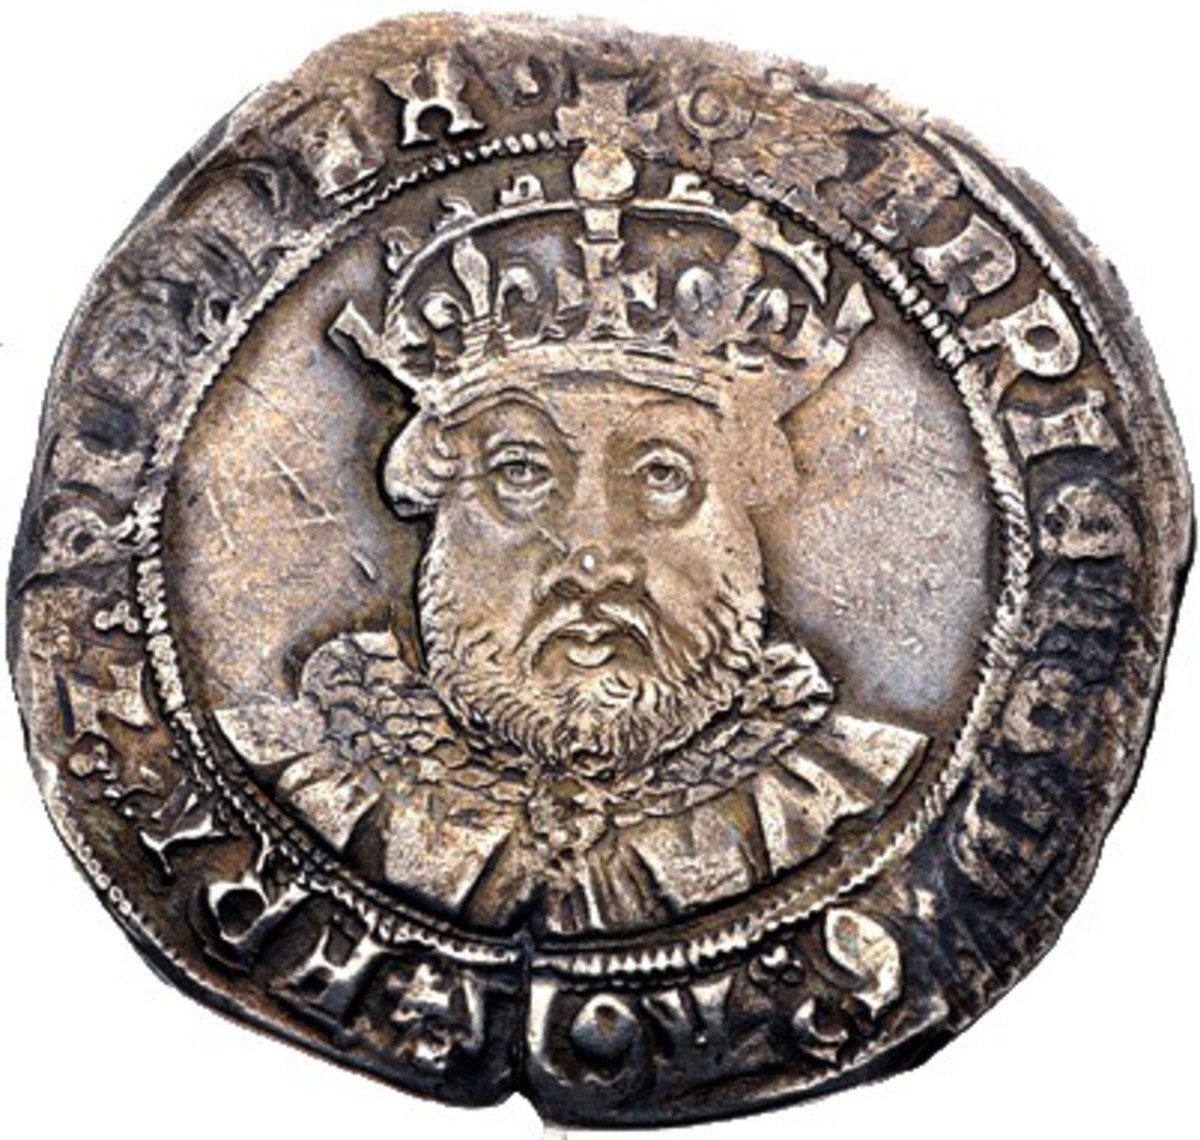 Coin with copper showing